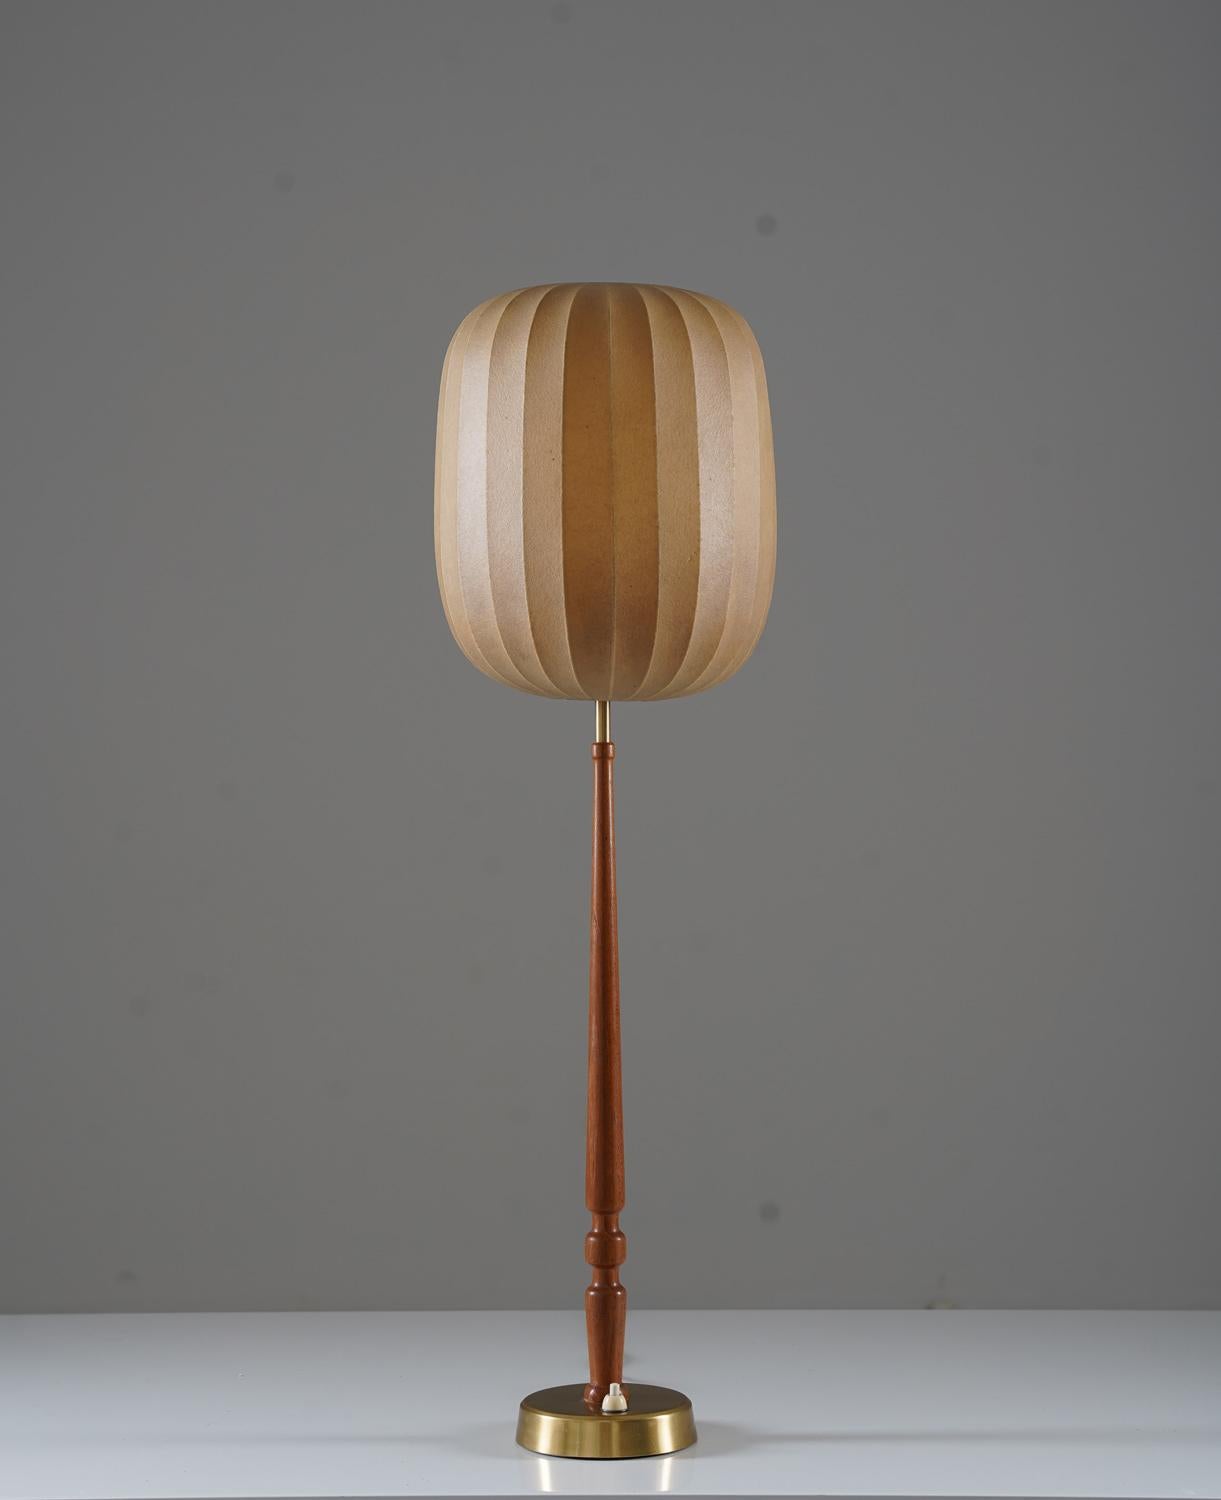 Rare table lamp model by Hans Bergström Model 743 by Ateljé Lyktan, Åhus.
The lamp consists of a brass and teak pole, holding a spray plastic shade which gives a stunning soft light when lit up.

Condition: Good original condition, a few stains